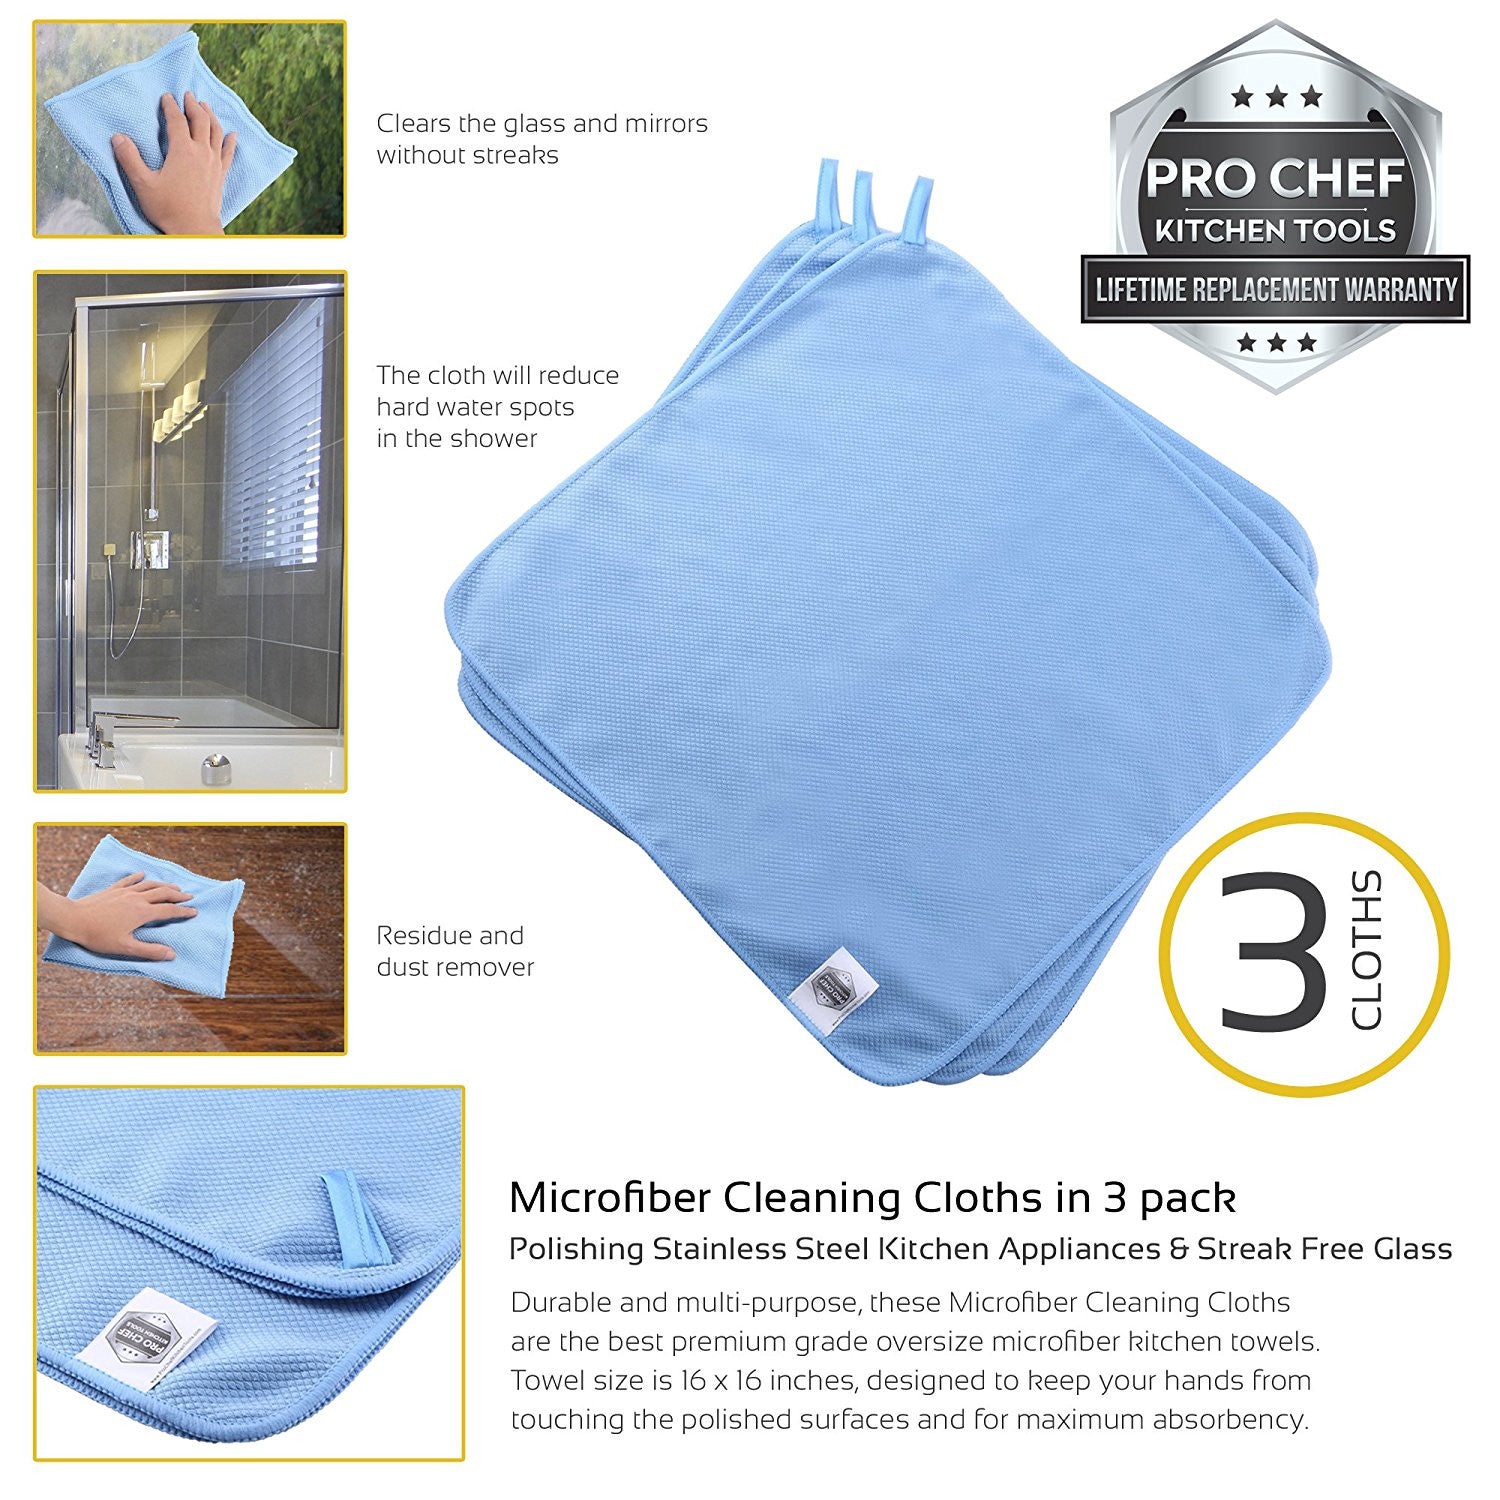  Quickie Microfiber Cleaning Cloth, Single, Grey, Multi-Surface Cleaning  Cloth, Ideal for Cleaning Kitchen, Bathroom, Living Rooms : Everything Else